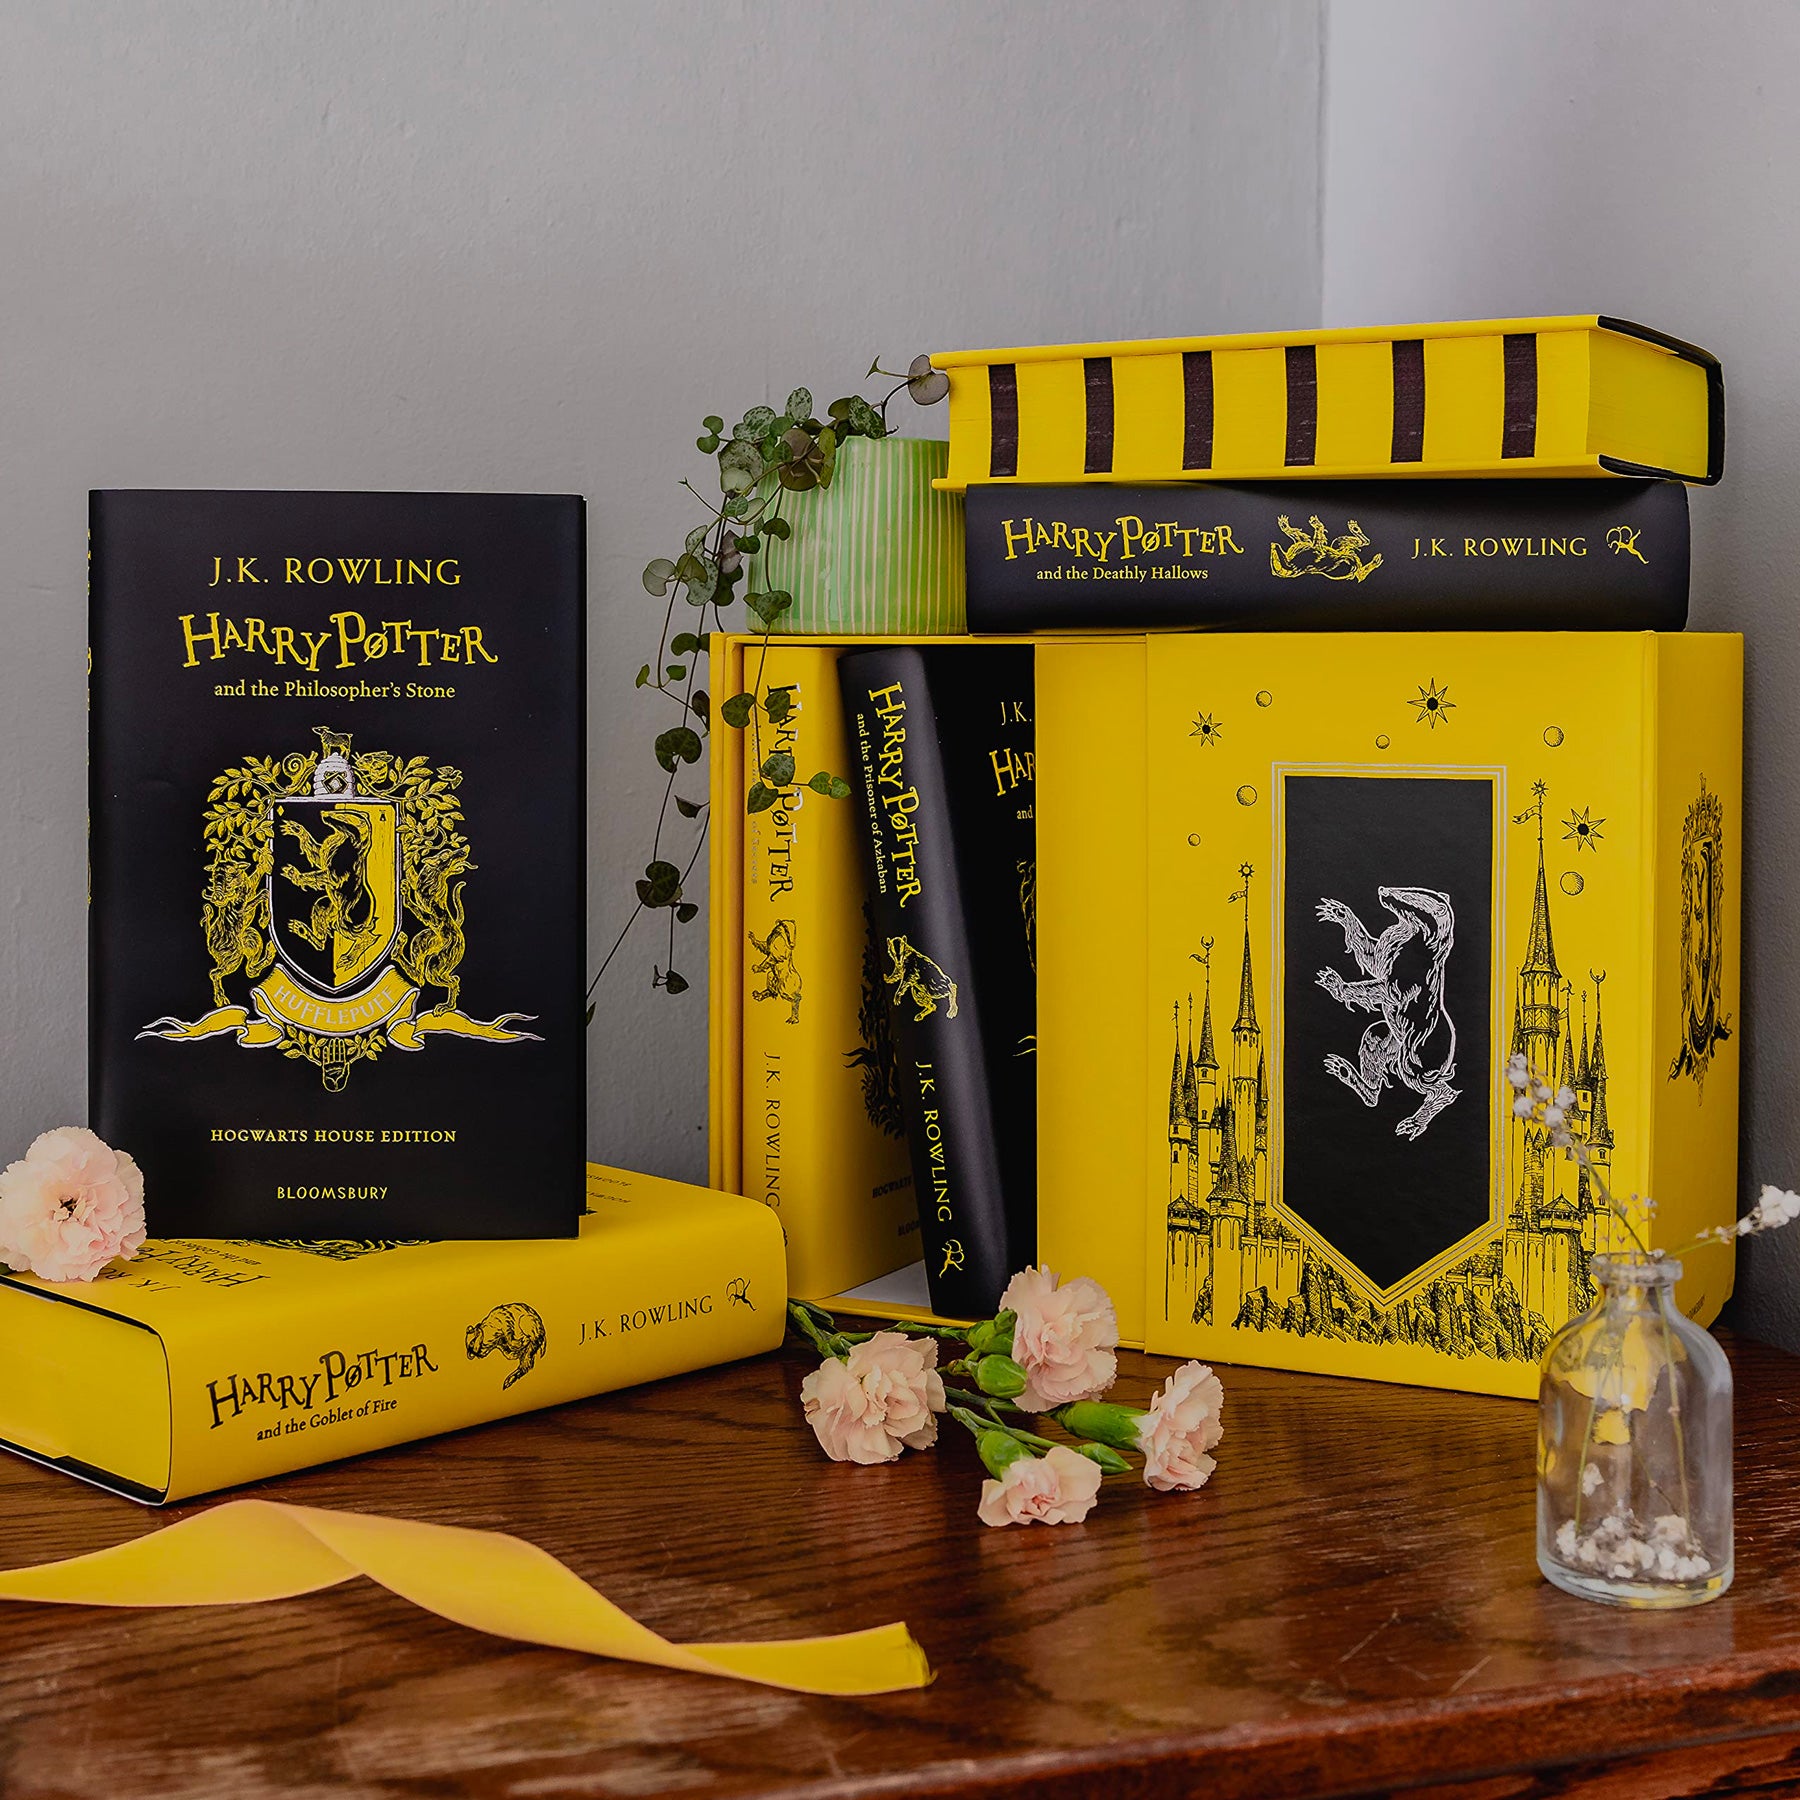 Hufflepuff Hardcover House Edition Complete Box Set